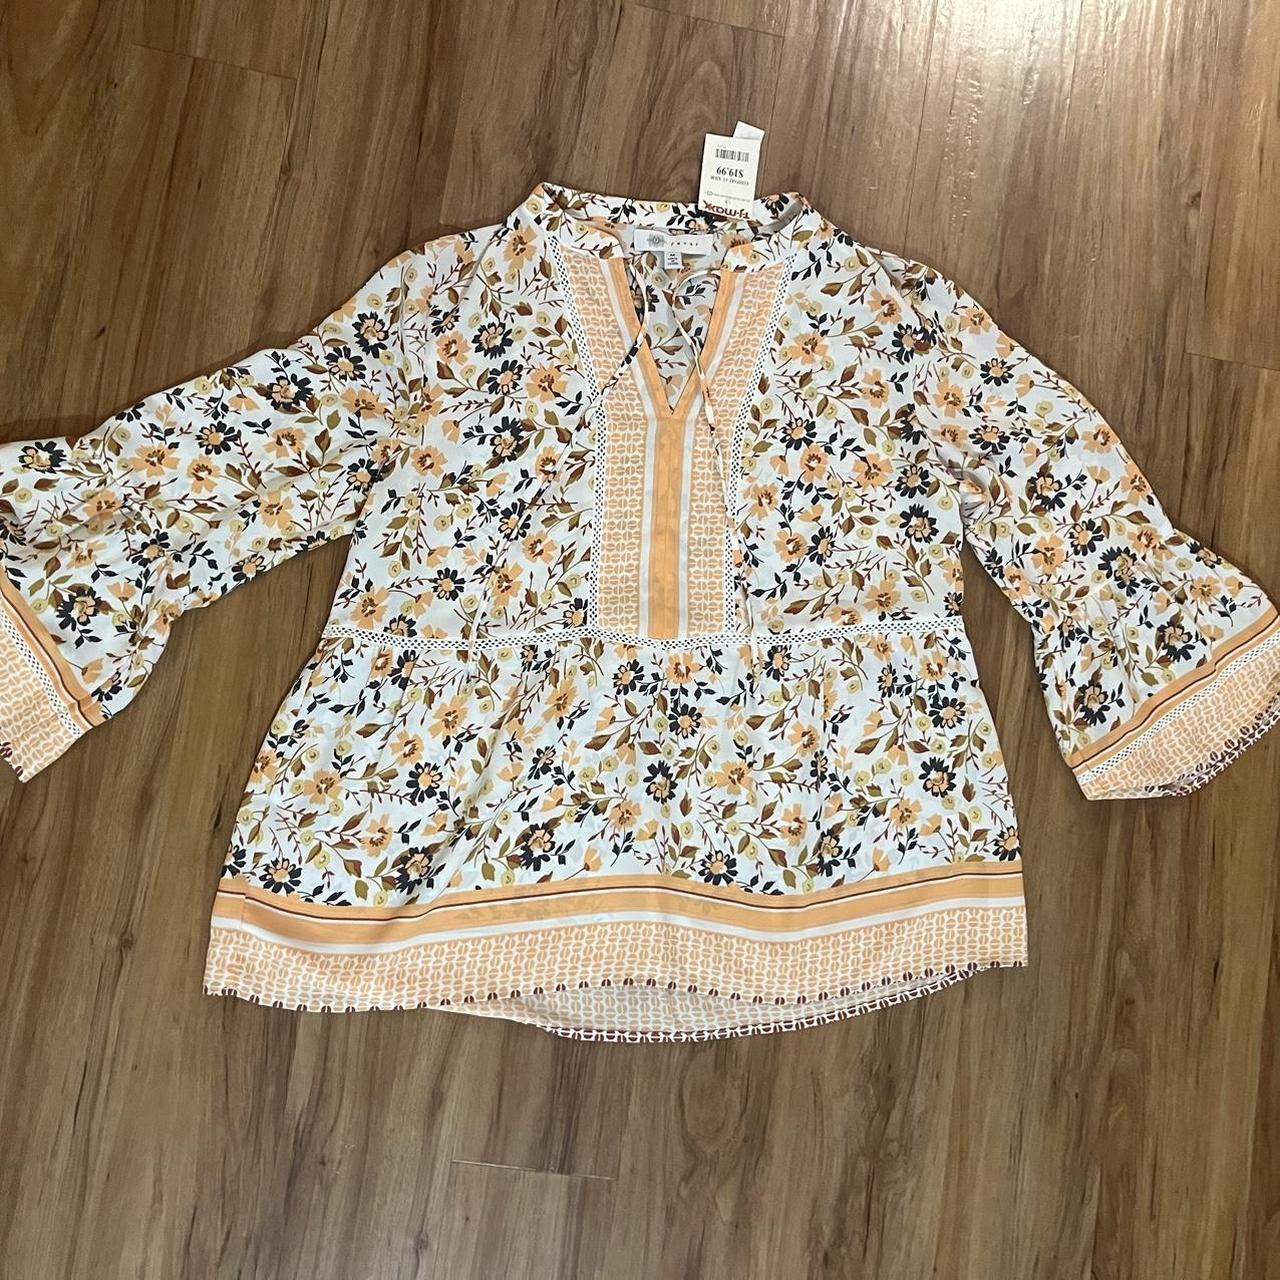 item listed by thifty_threadz